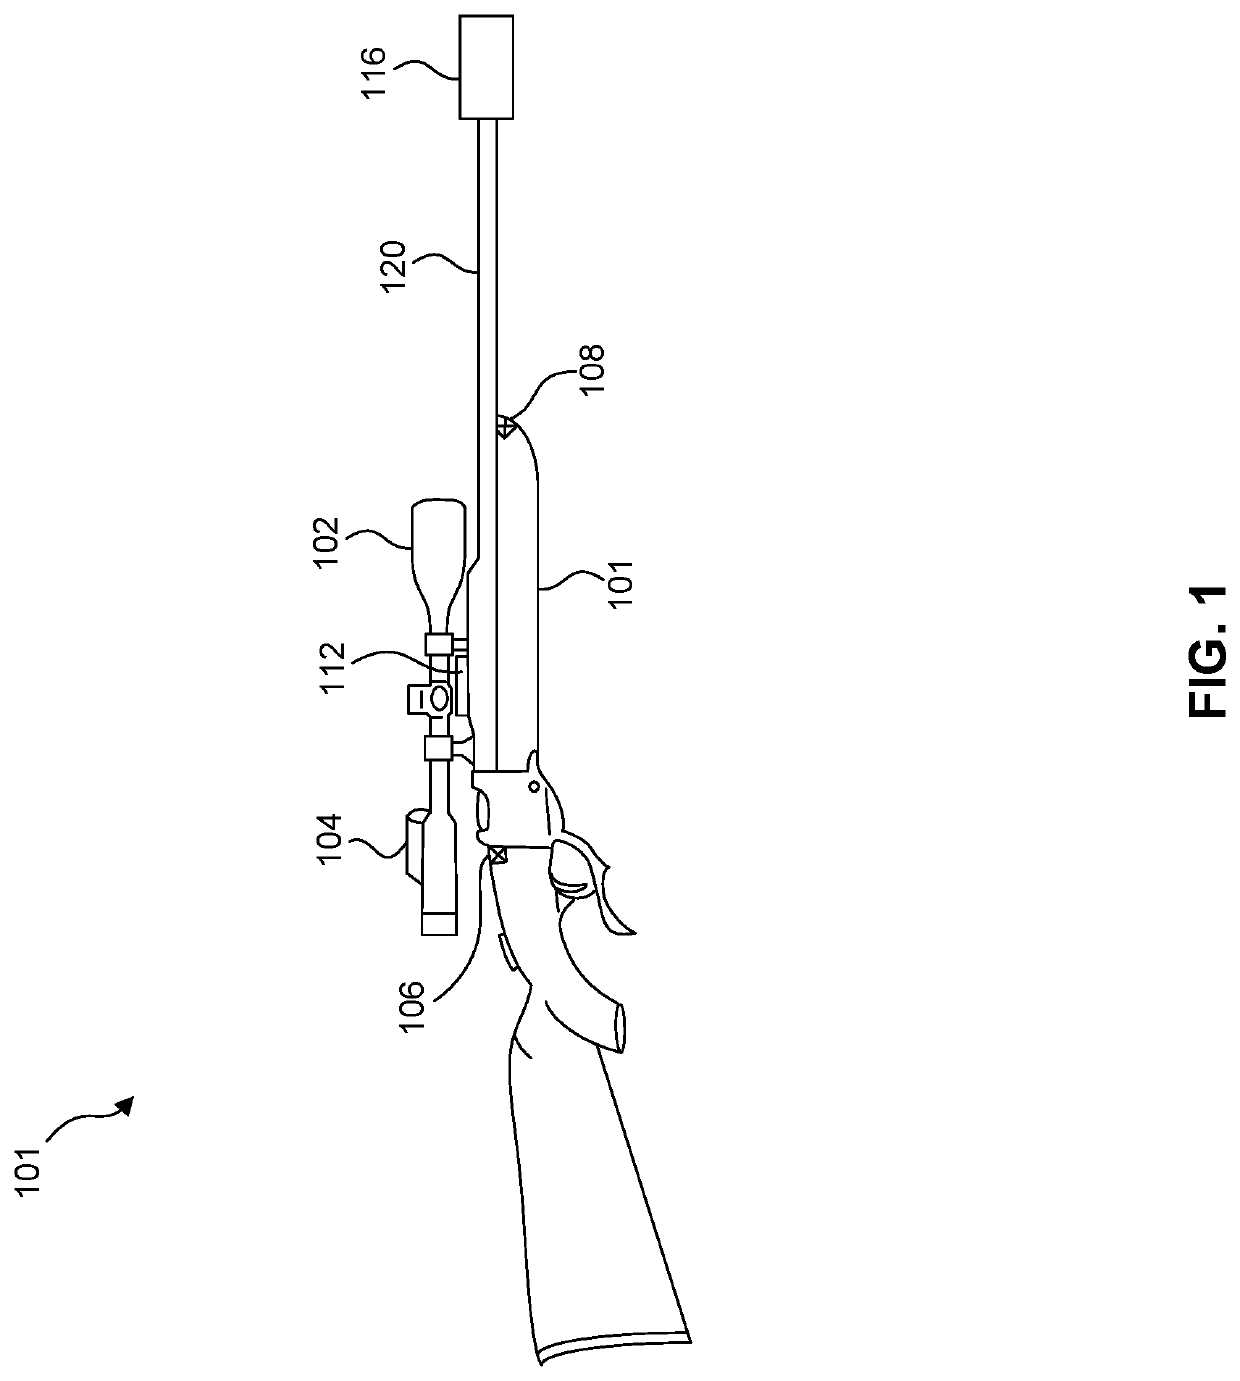 Systems and methods for firearm aim-stabilization